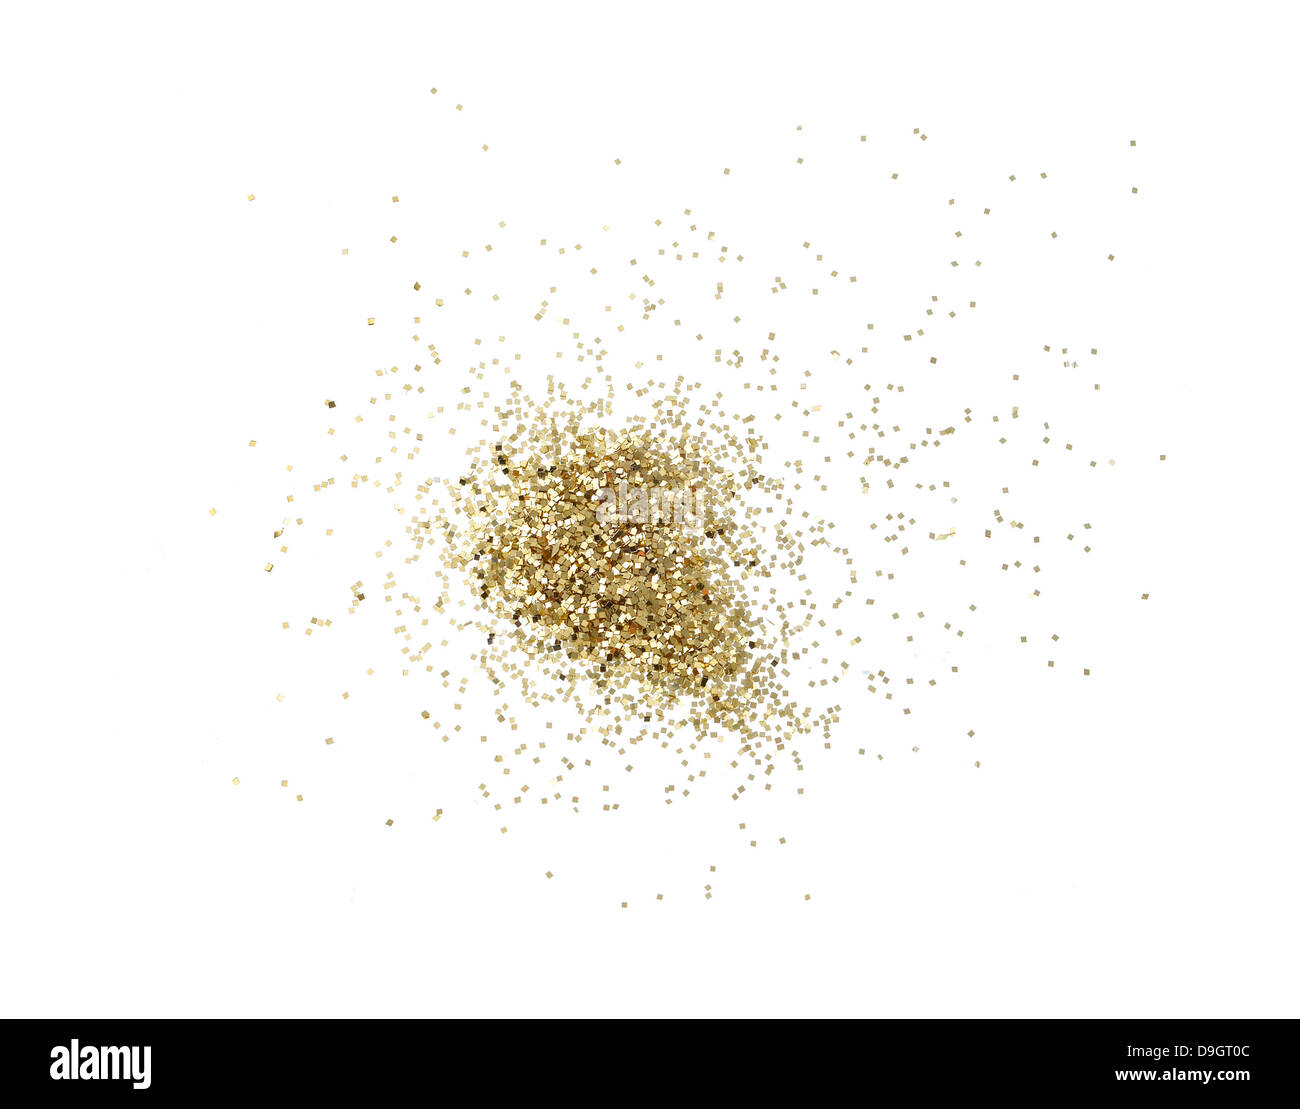 loose pile of gold glitter cut out onto a white background Stock Photo